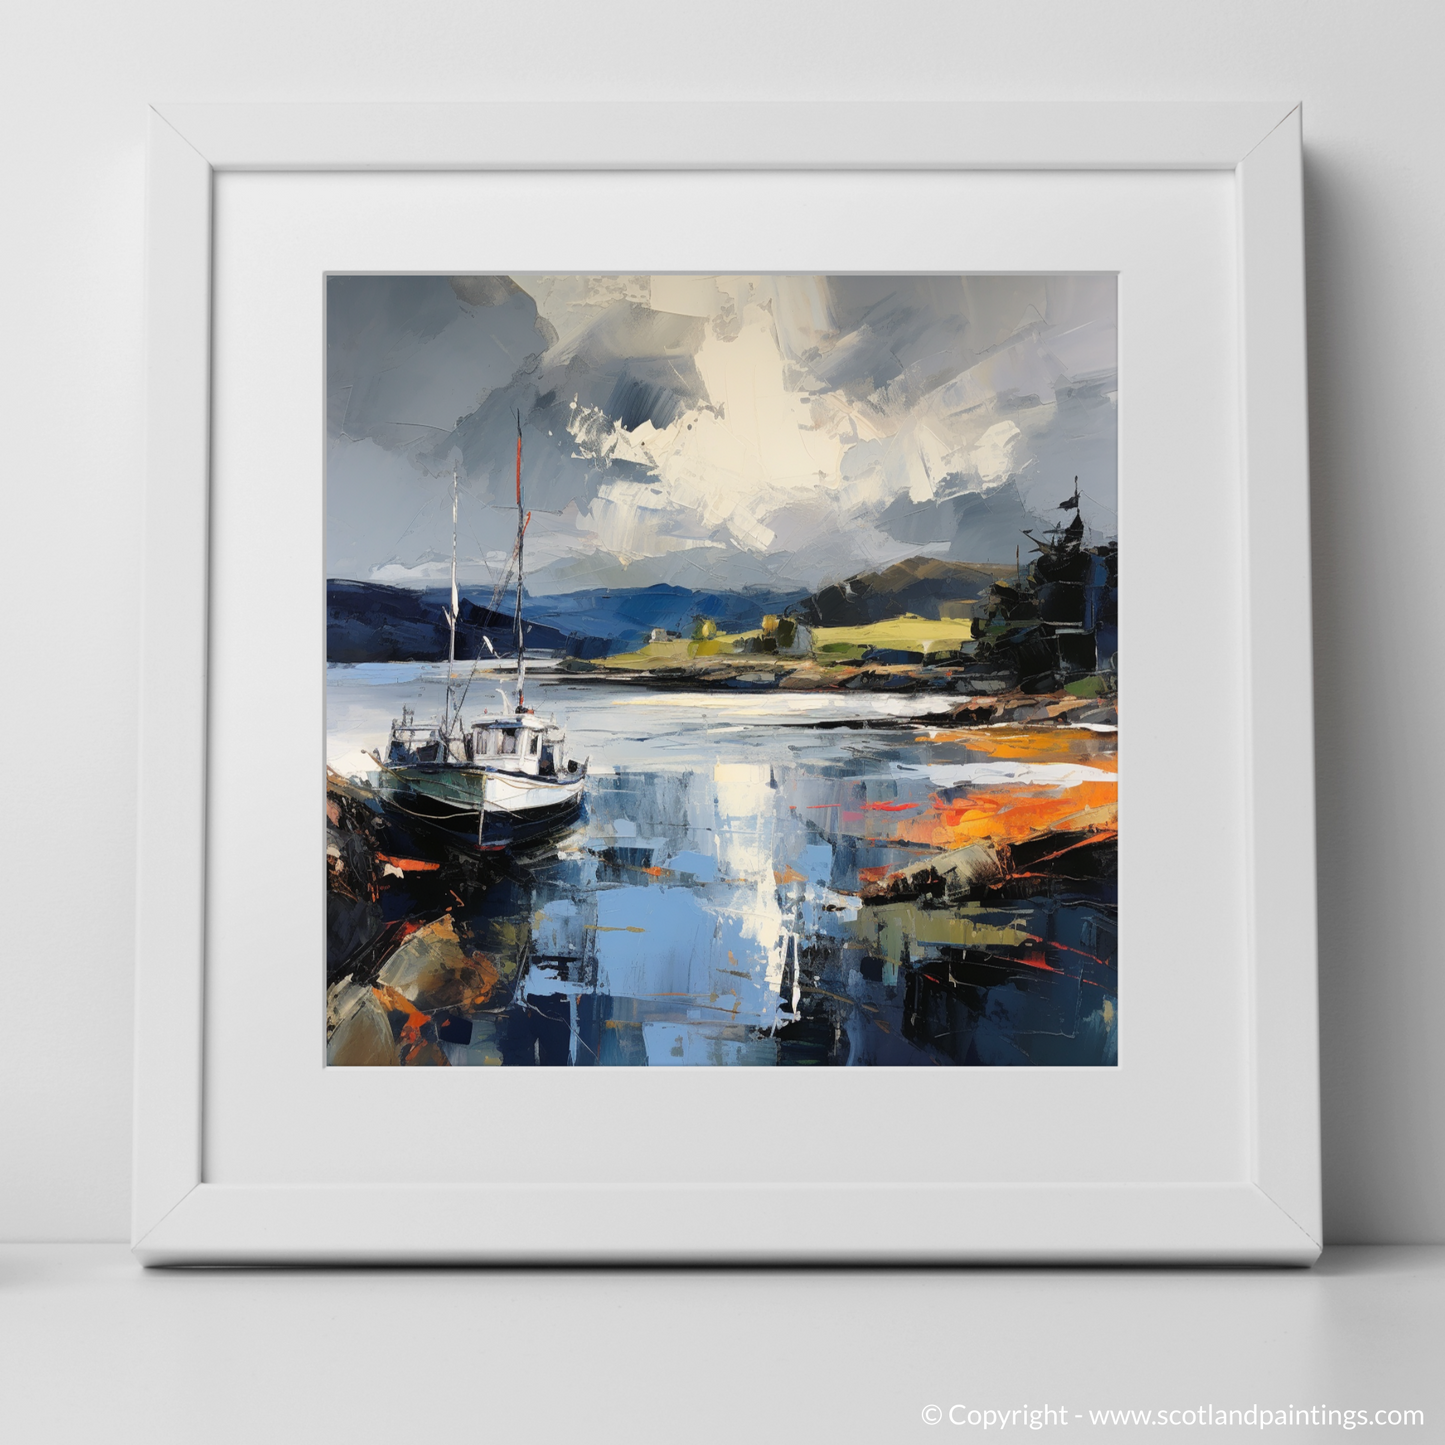 Art Print of Tayvallich Harbour with a stormy sky with a white frame